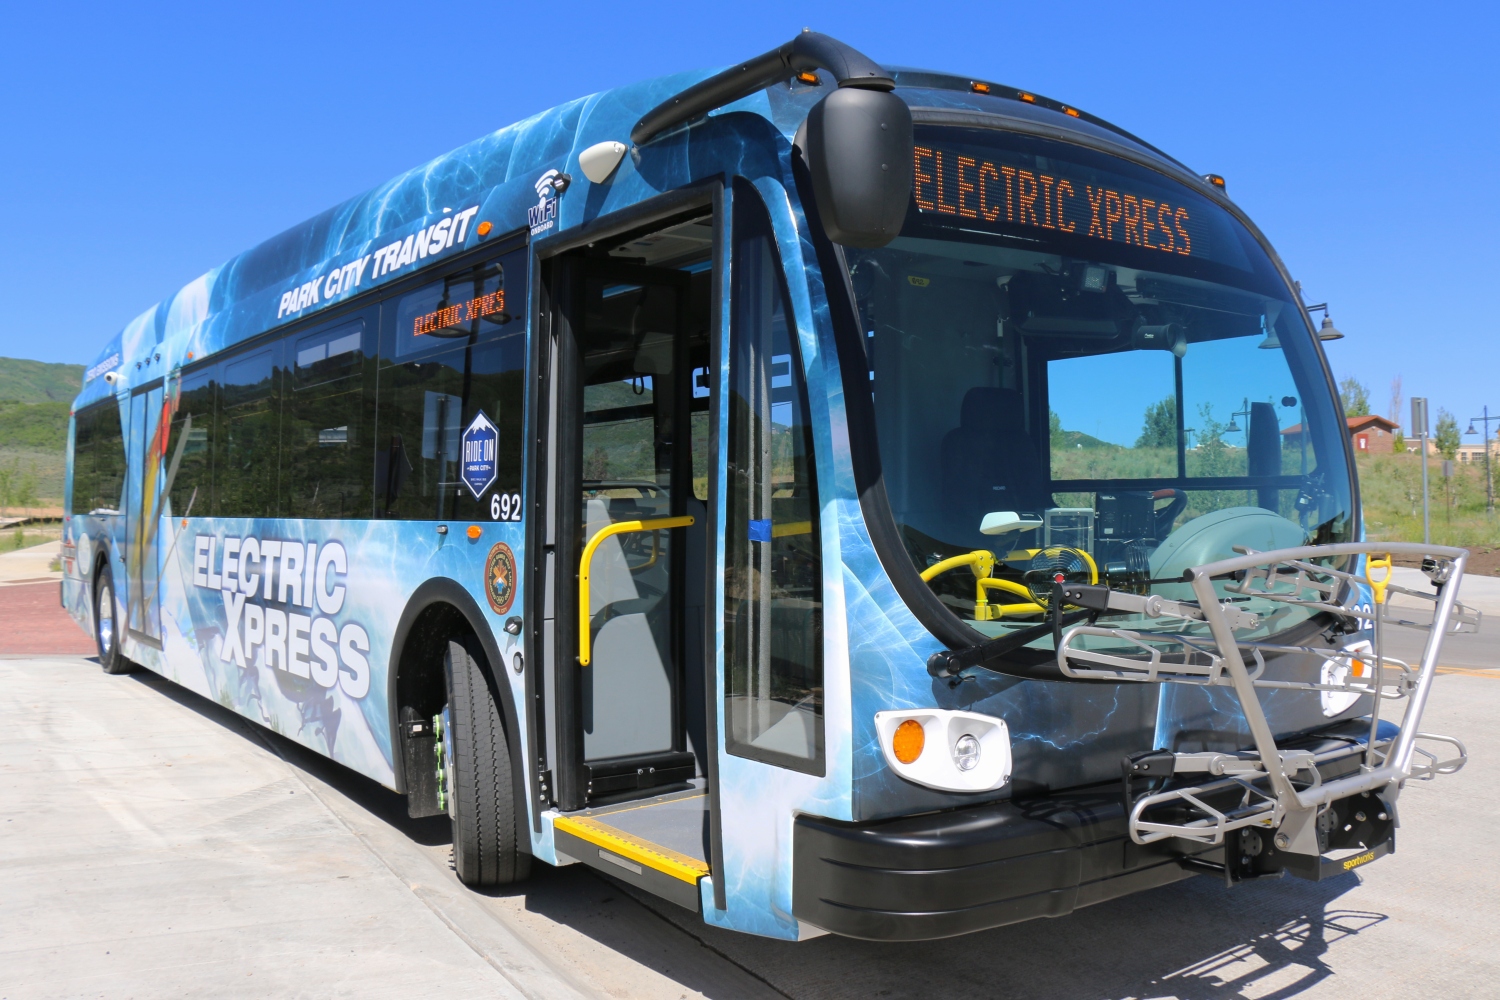 An electric city bus parked with doors open in Park City, UT